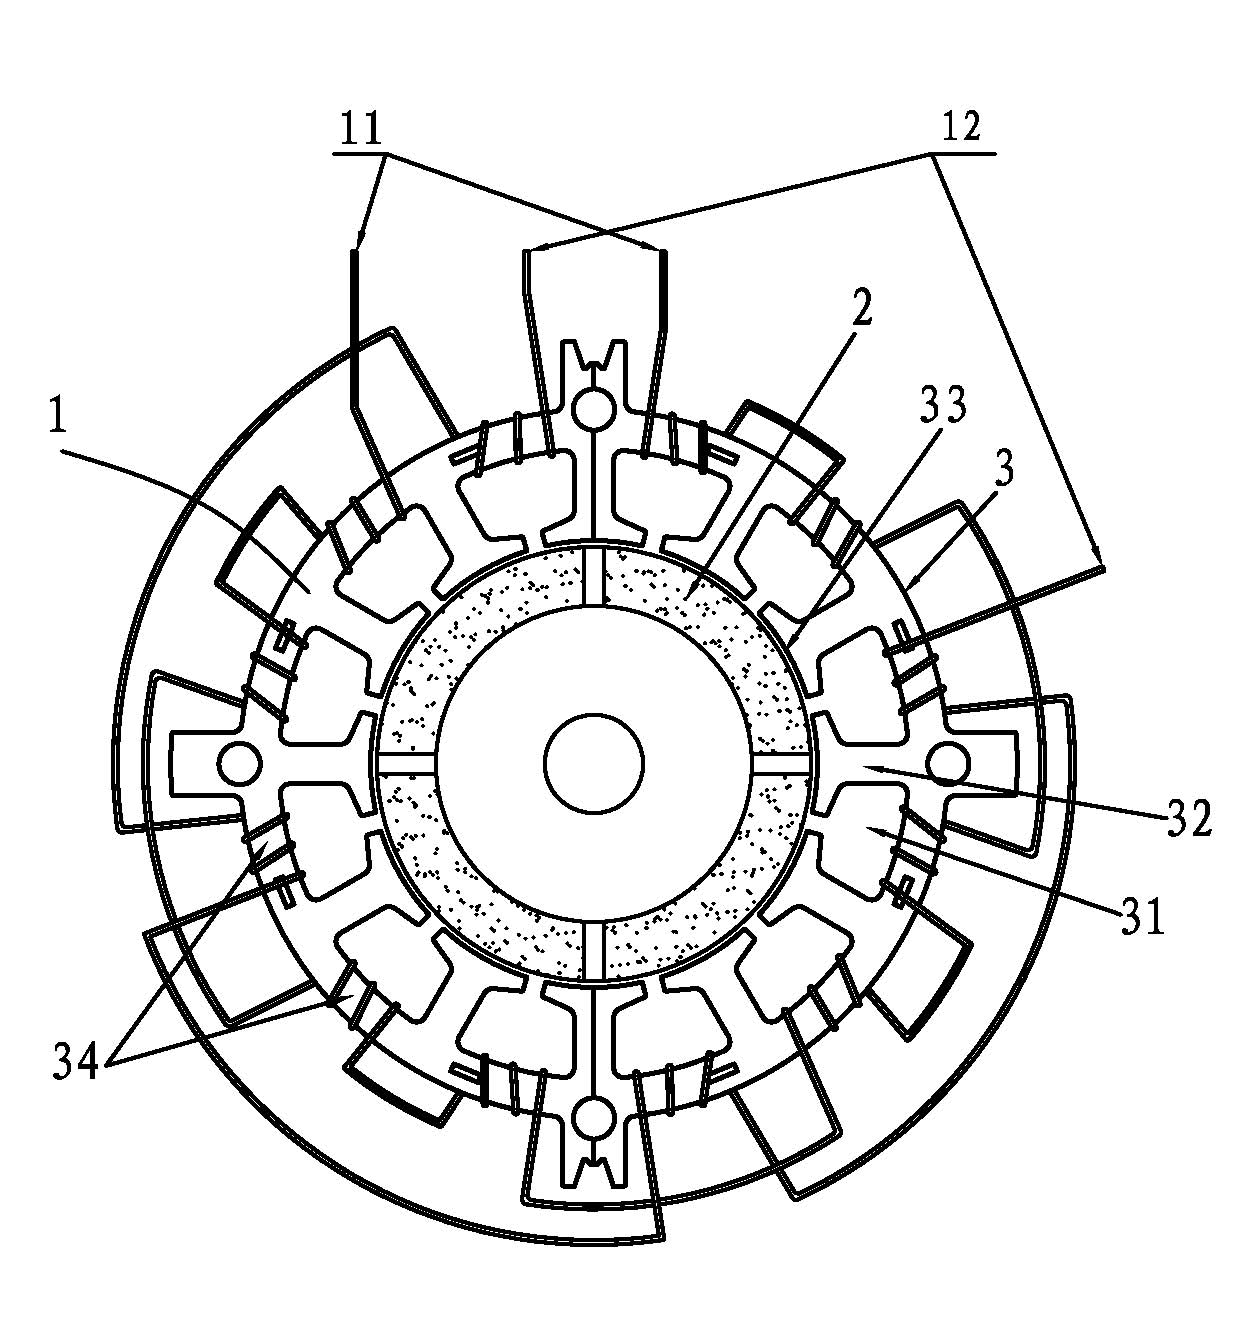 A permanent magnet two-phase brushless divided stator motor